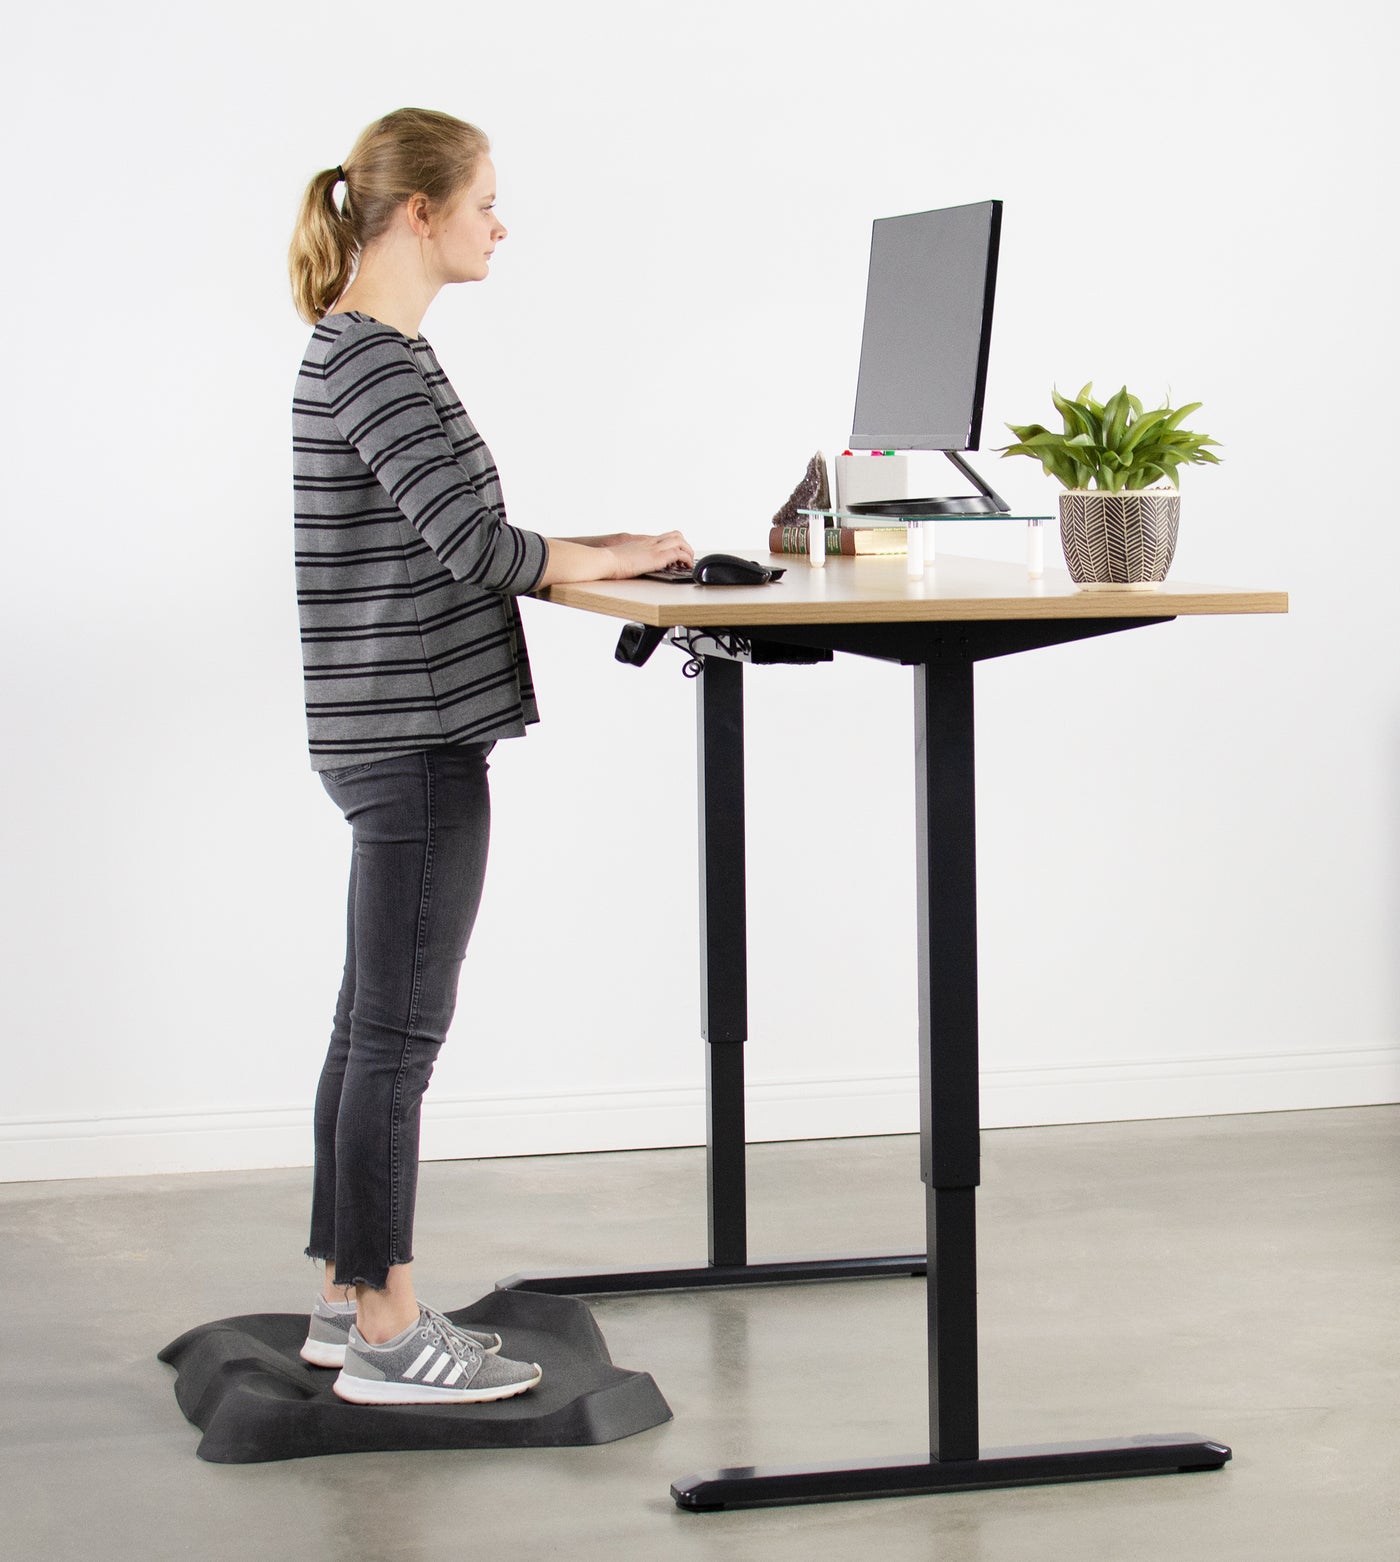 Enjoy new comfortable working positions while standing.